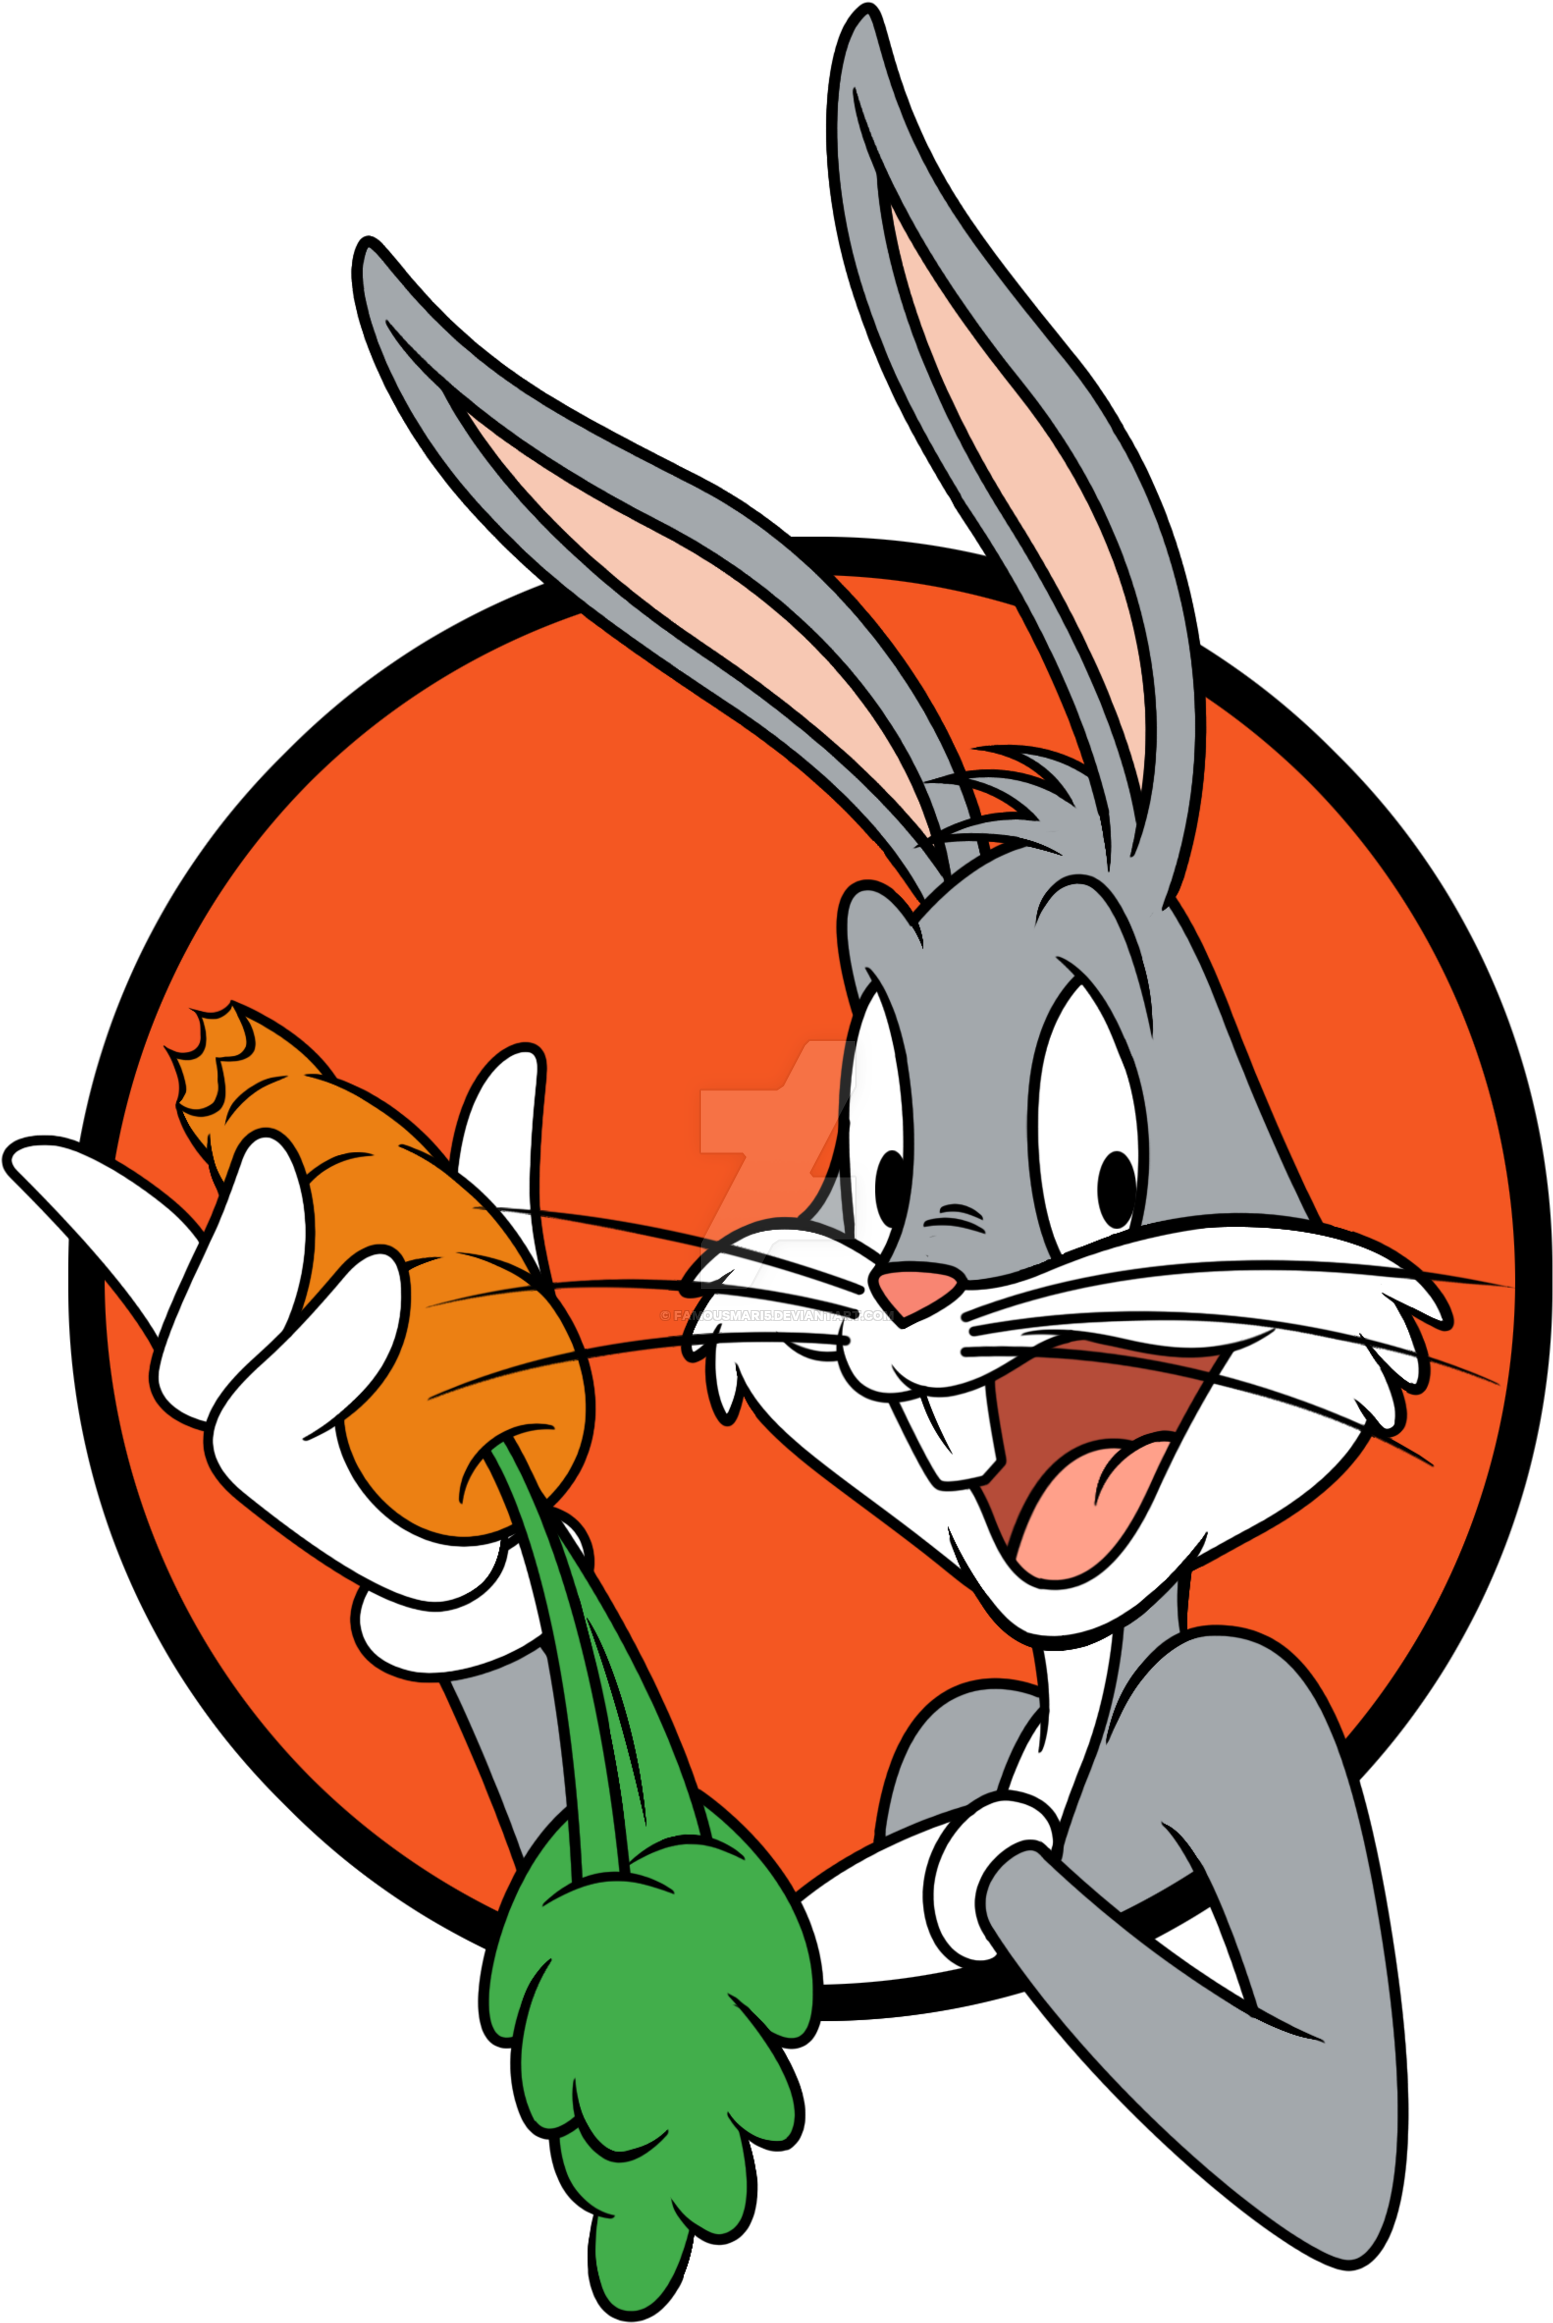 Download and share clipart about Bugs Bunny Icon By Famousmari5 - Bugs Bunn...